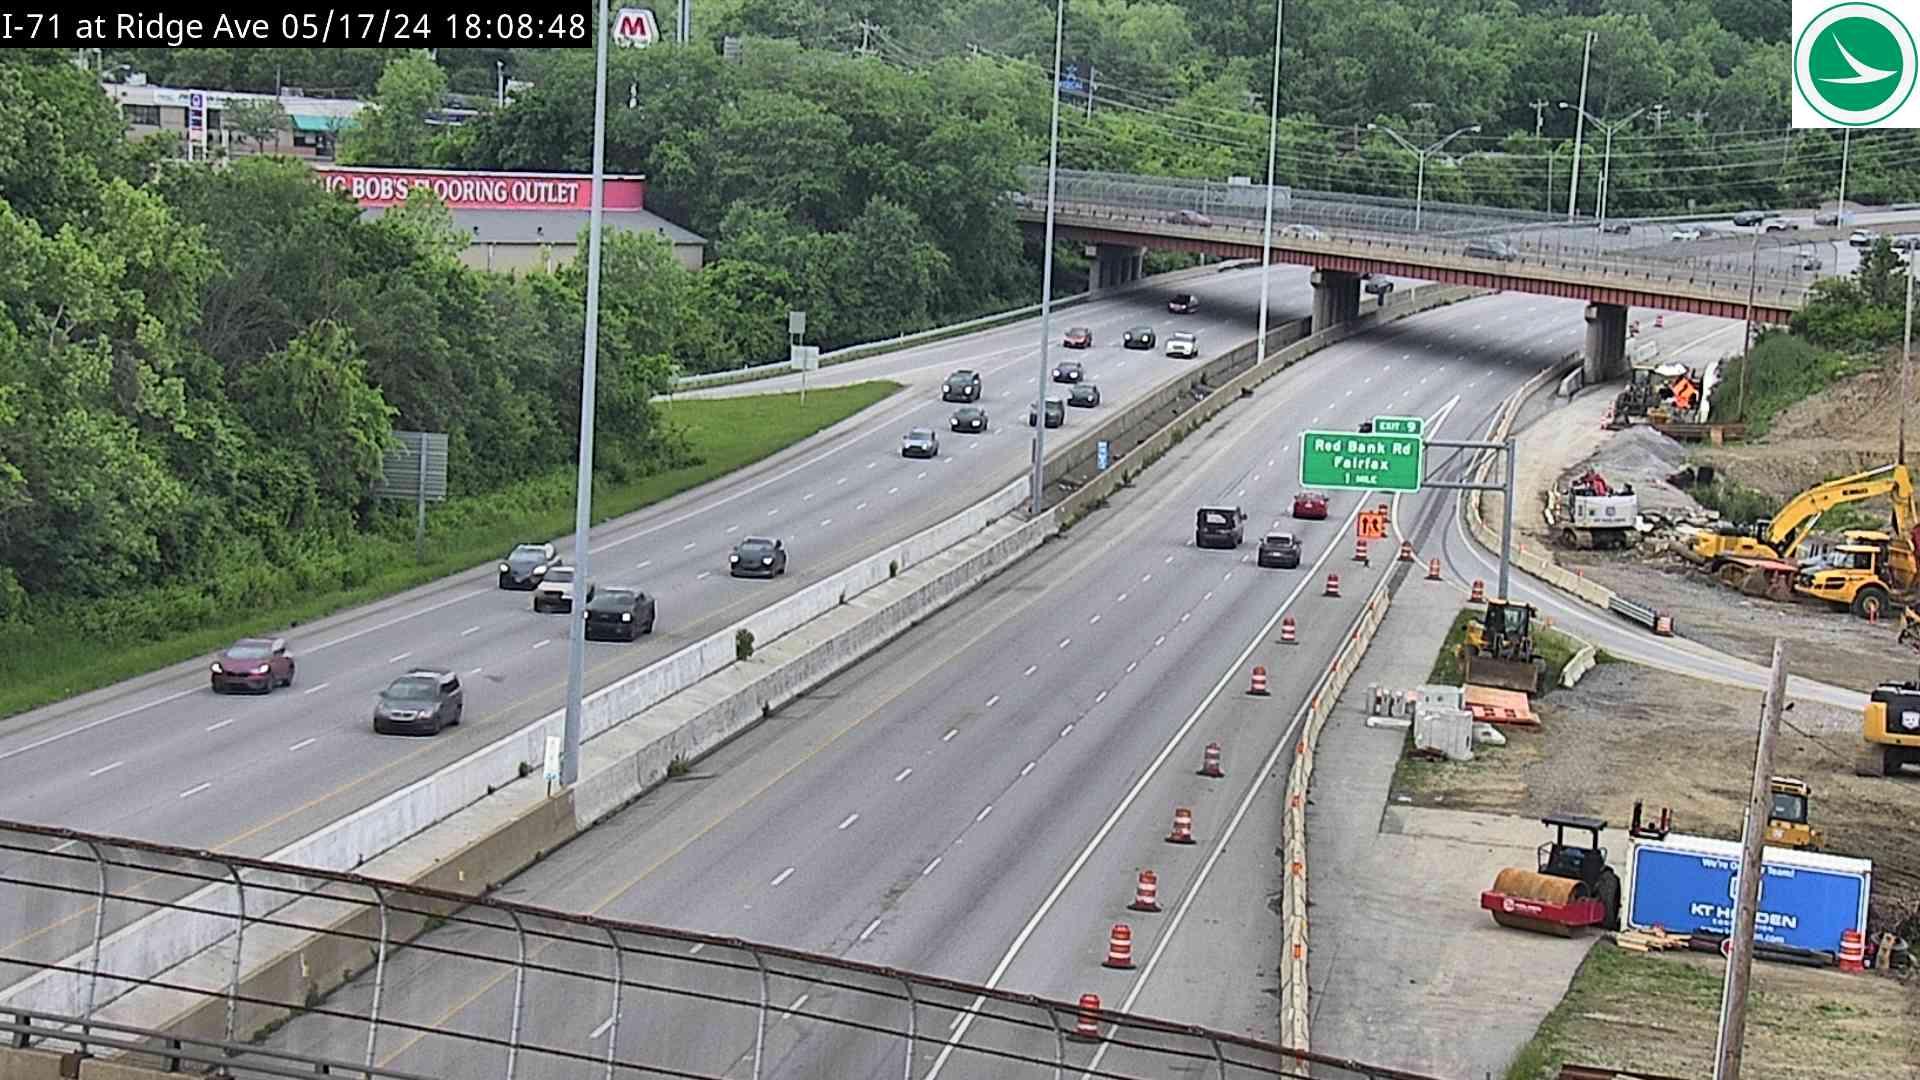 Traffic Cam Norwood Heights: I-71 at Ridge Ave Player